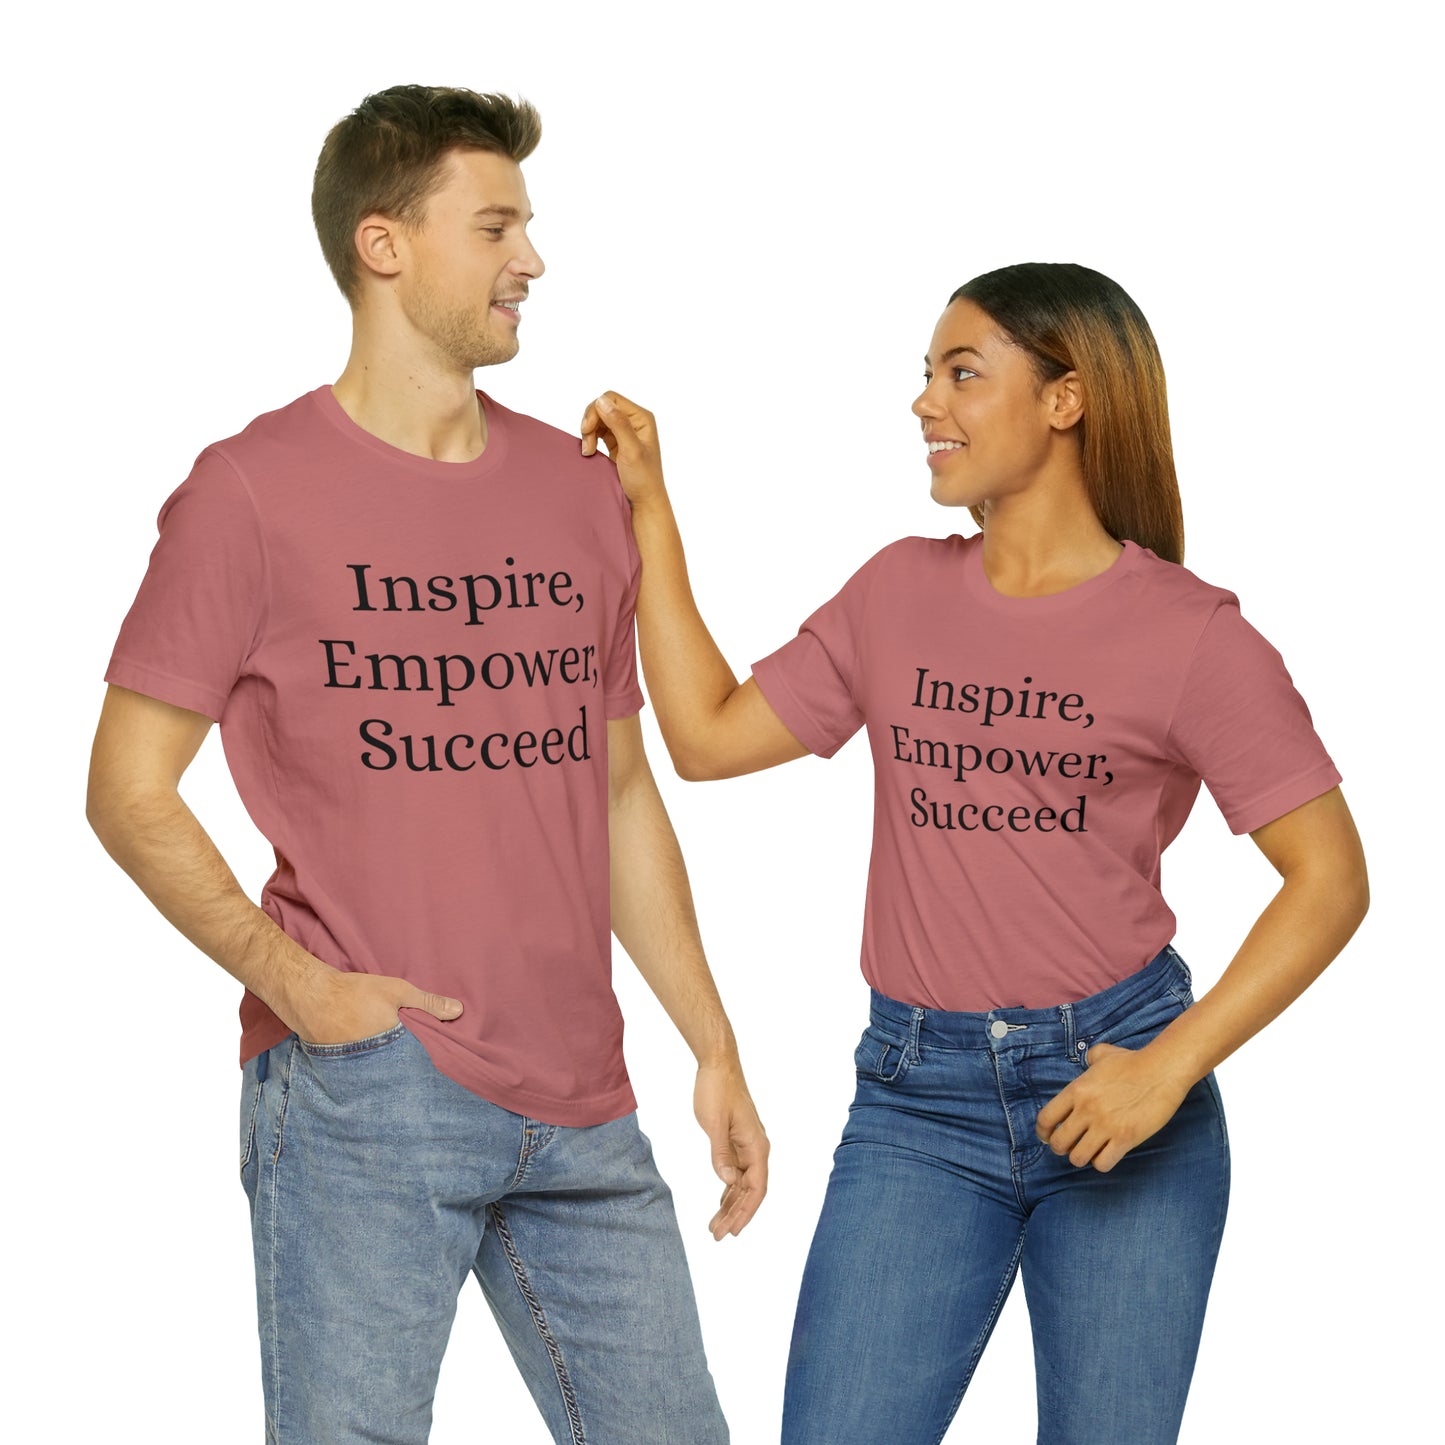 Inspire, Empower, Succeed